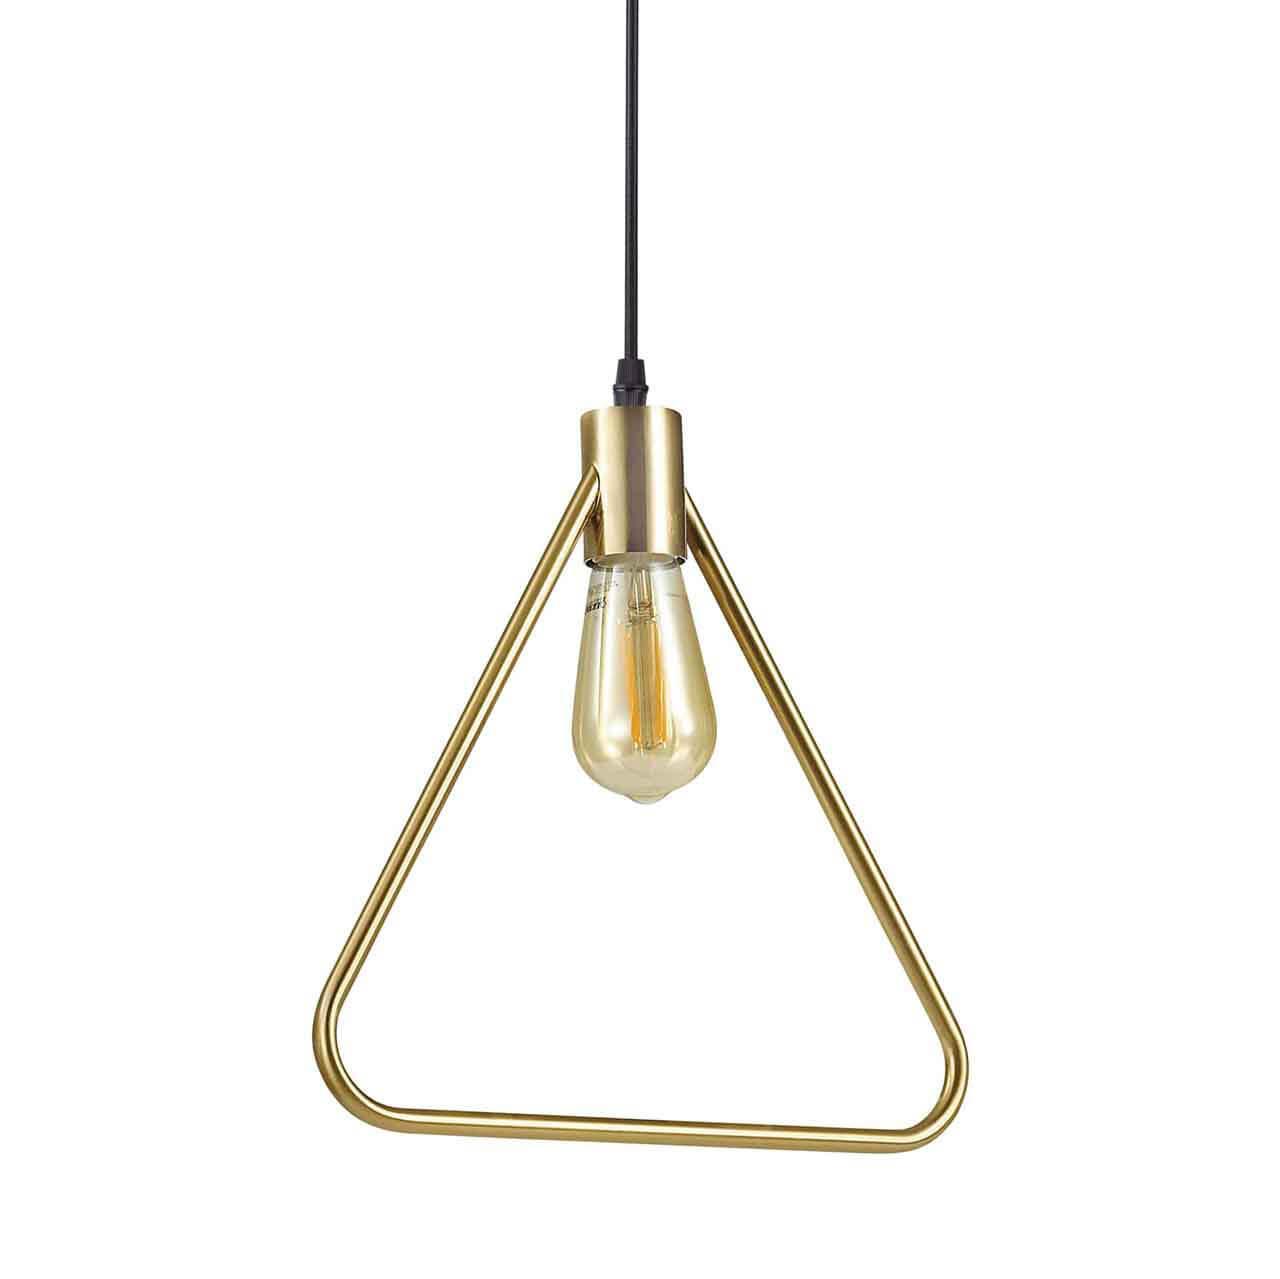   Ideal Lux Abc SP1 Triangle 207834